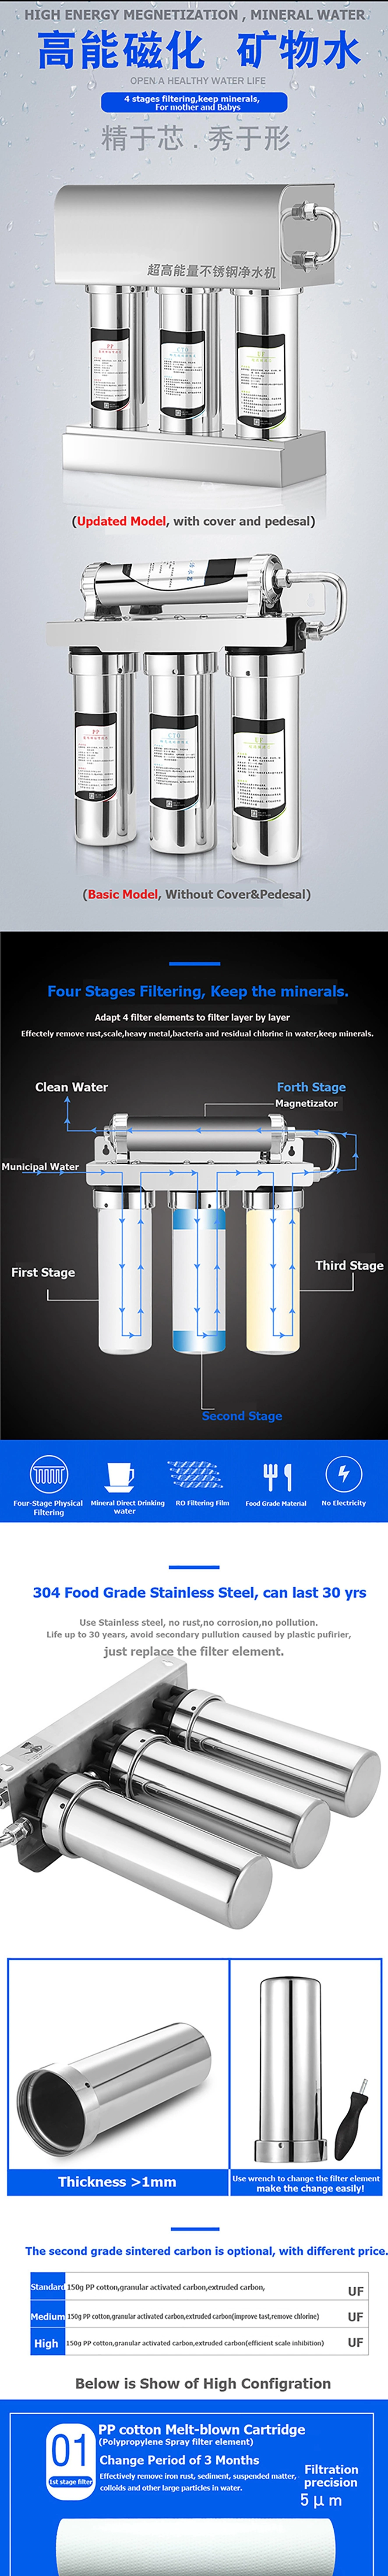 Incomparable Water Treatment System Household Table Water Purifier Filter Plant